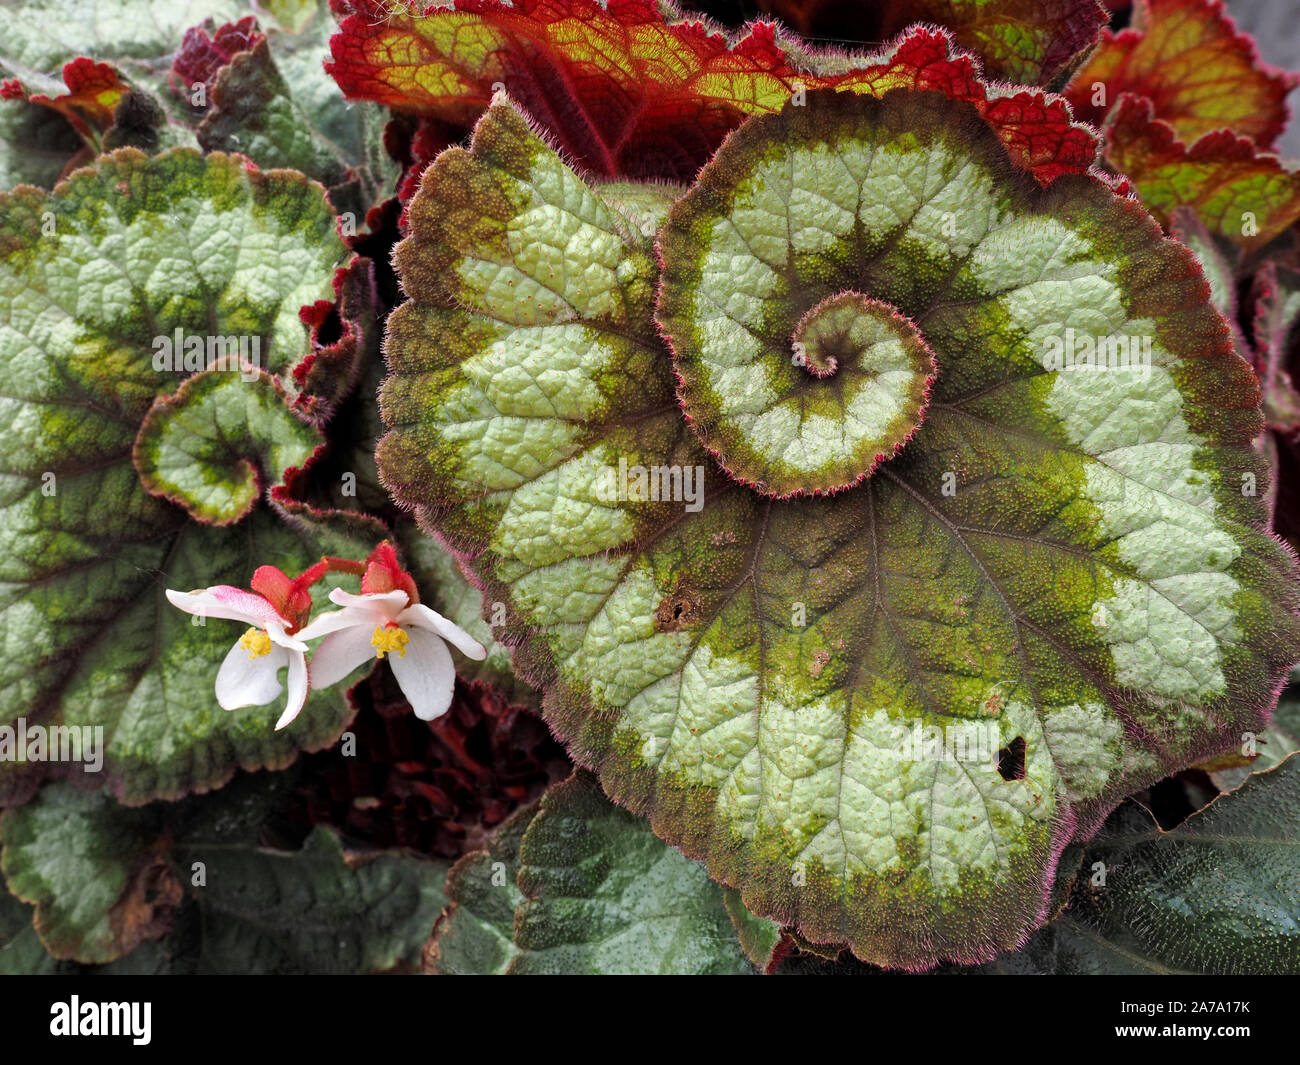 Begonia Rex - painted-leaf begonias or fancy-leaf begonias - with two white & red flowers beside coiled variegated leaf in green grey &reddish pink Stock Photo